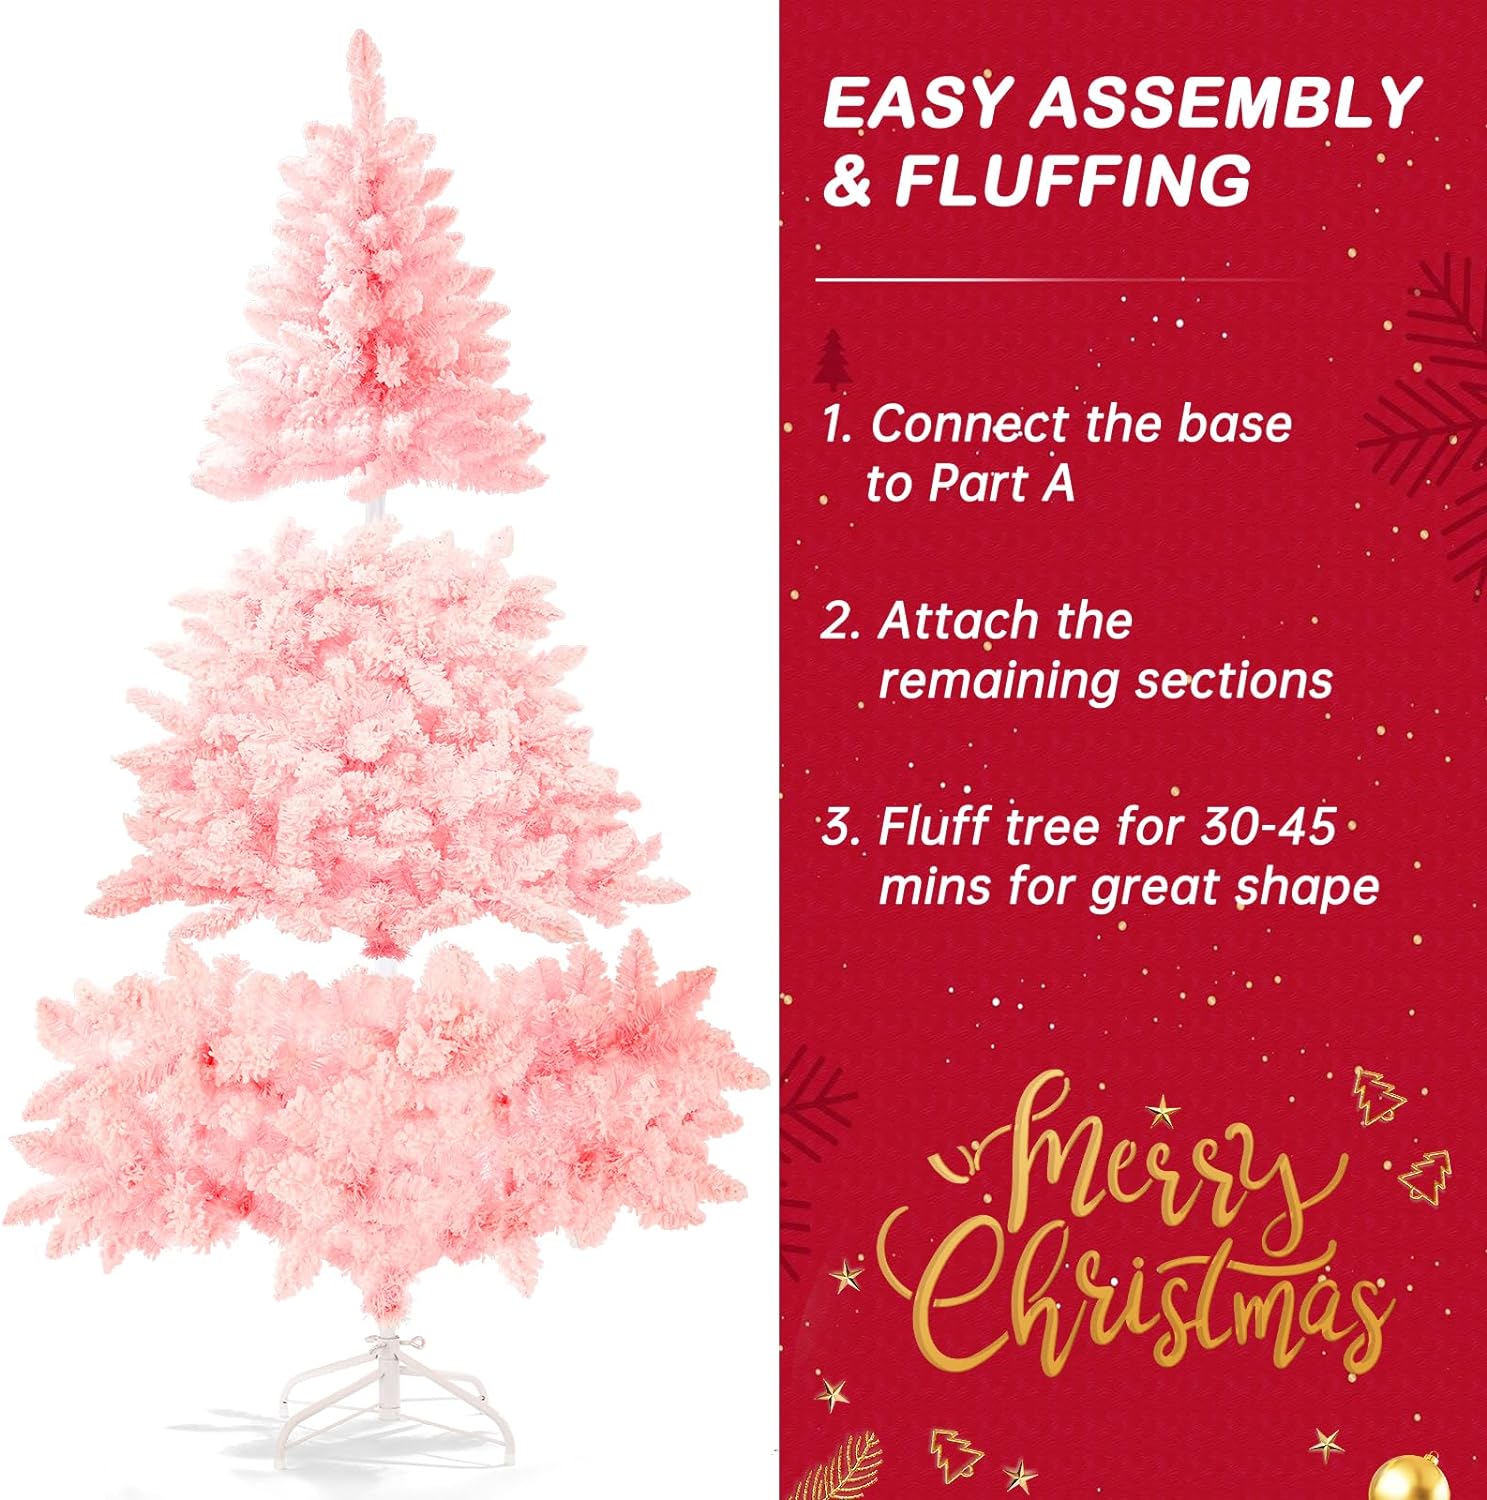 Outroad 6ft Snow Flocked Christmas Tree Premium Hinged Artificial Pine Tree,Xmas Tree Metal Stand and 800 Lush Branch Tips Holiday Decorate, Easy to Assemble,Blue